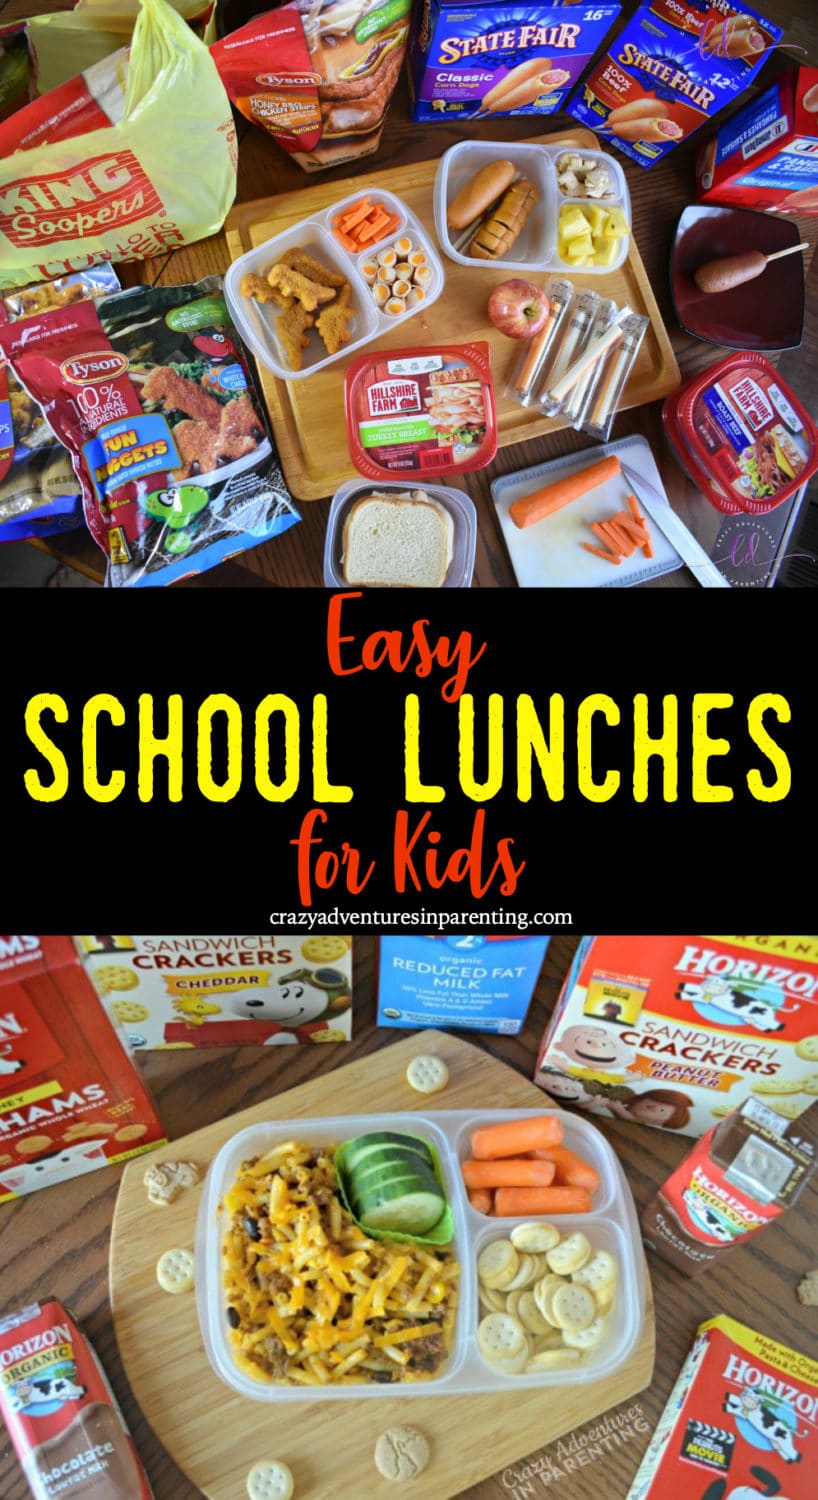 Easy School Lunches for Kids